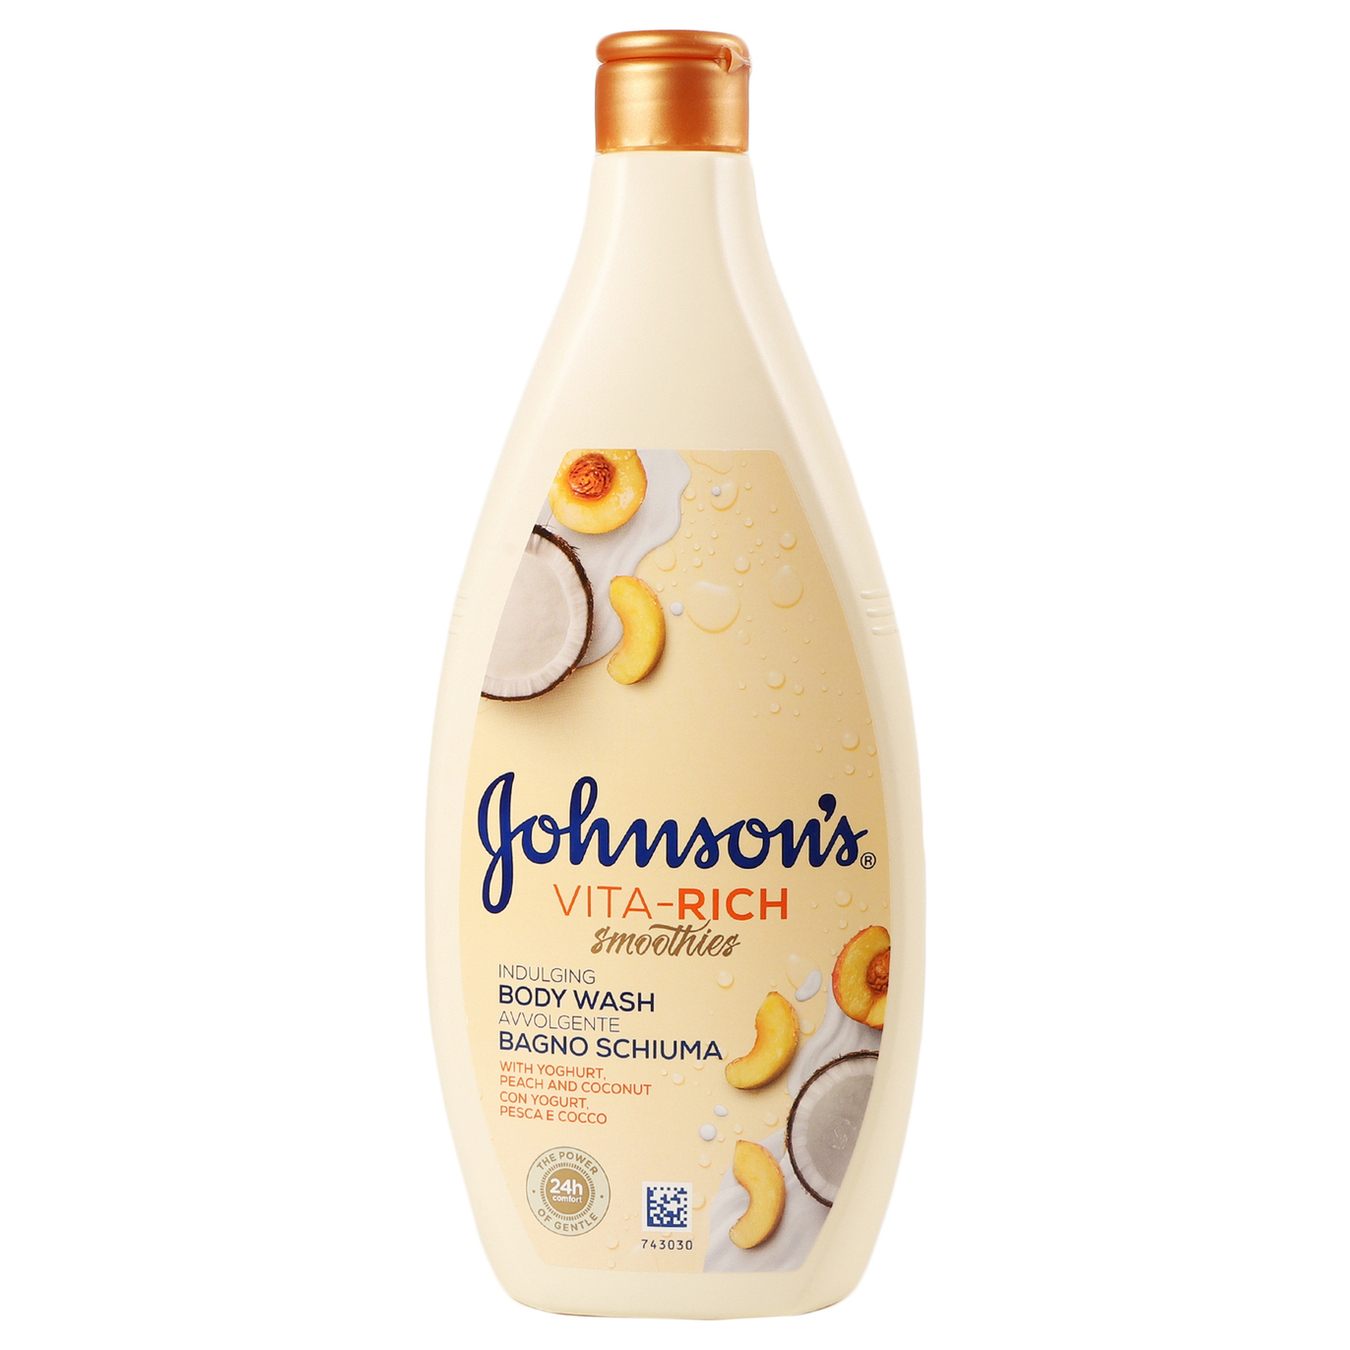 Shower gel Johnson's Vita-Rich Smoothie Relaxing with coconut yogurt and peach extract 750ml